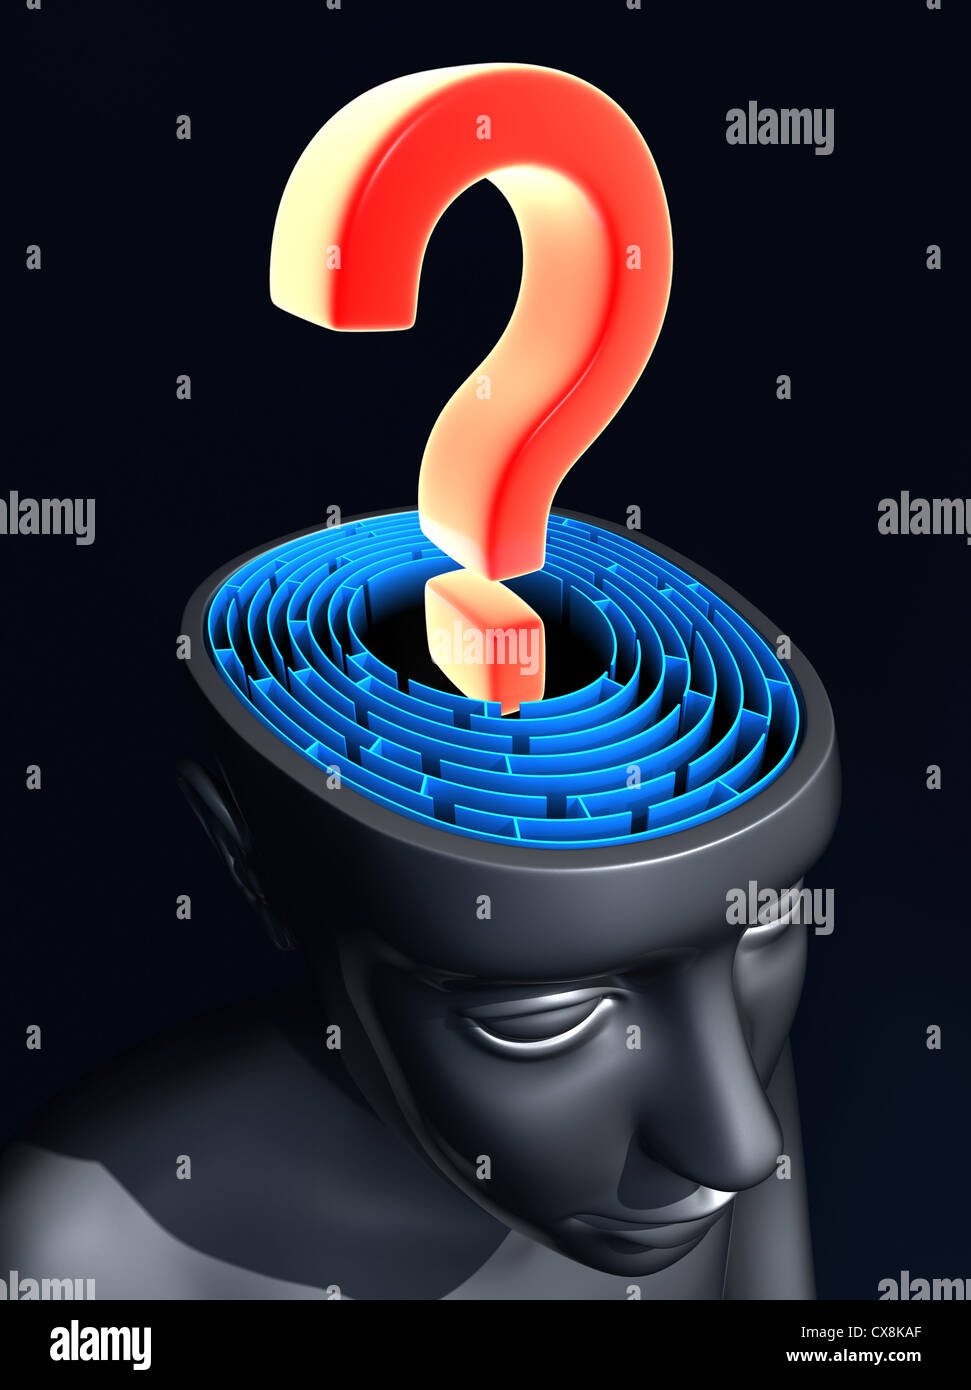 Question mark on the center of labyrinth inside the head. Concept of confused mind. Stock Photo